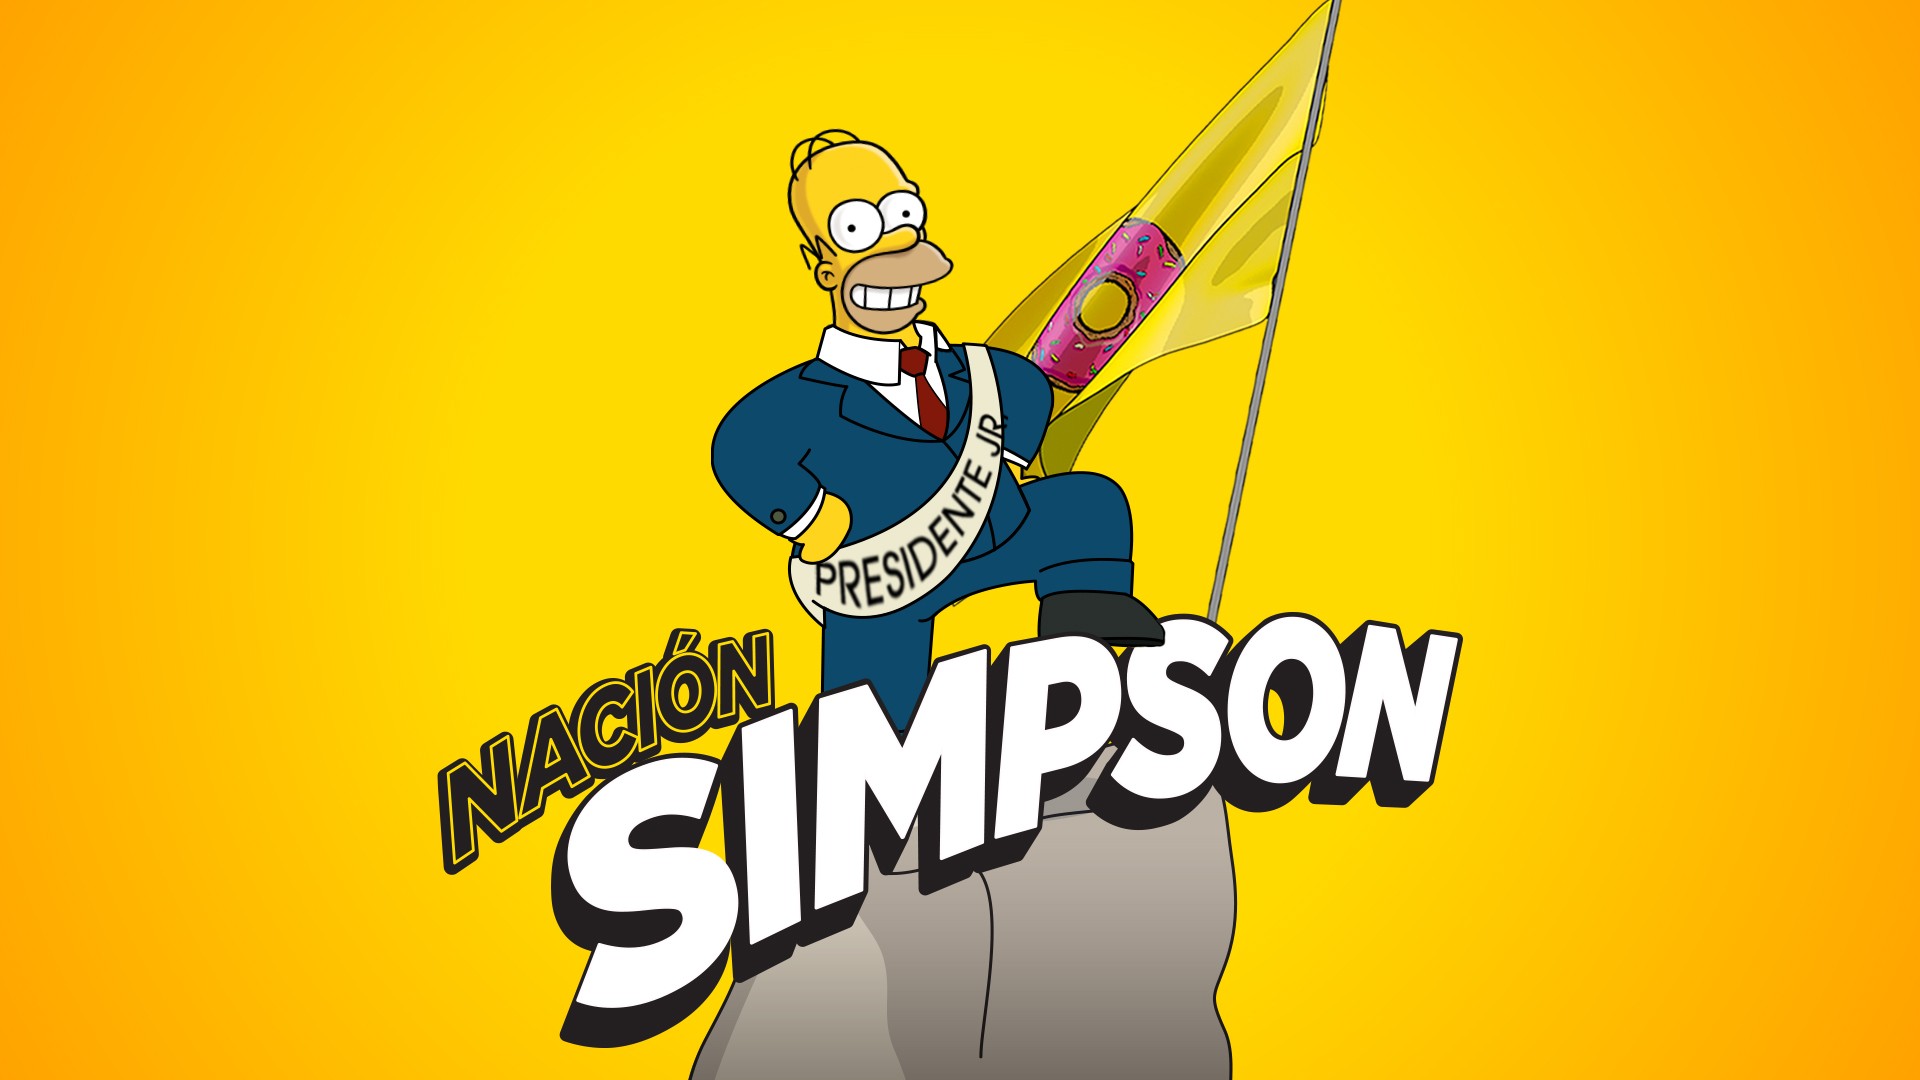 General 1920x1080 The Simpsons Homer Simpson simple background smiling cartoon TV series